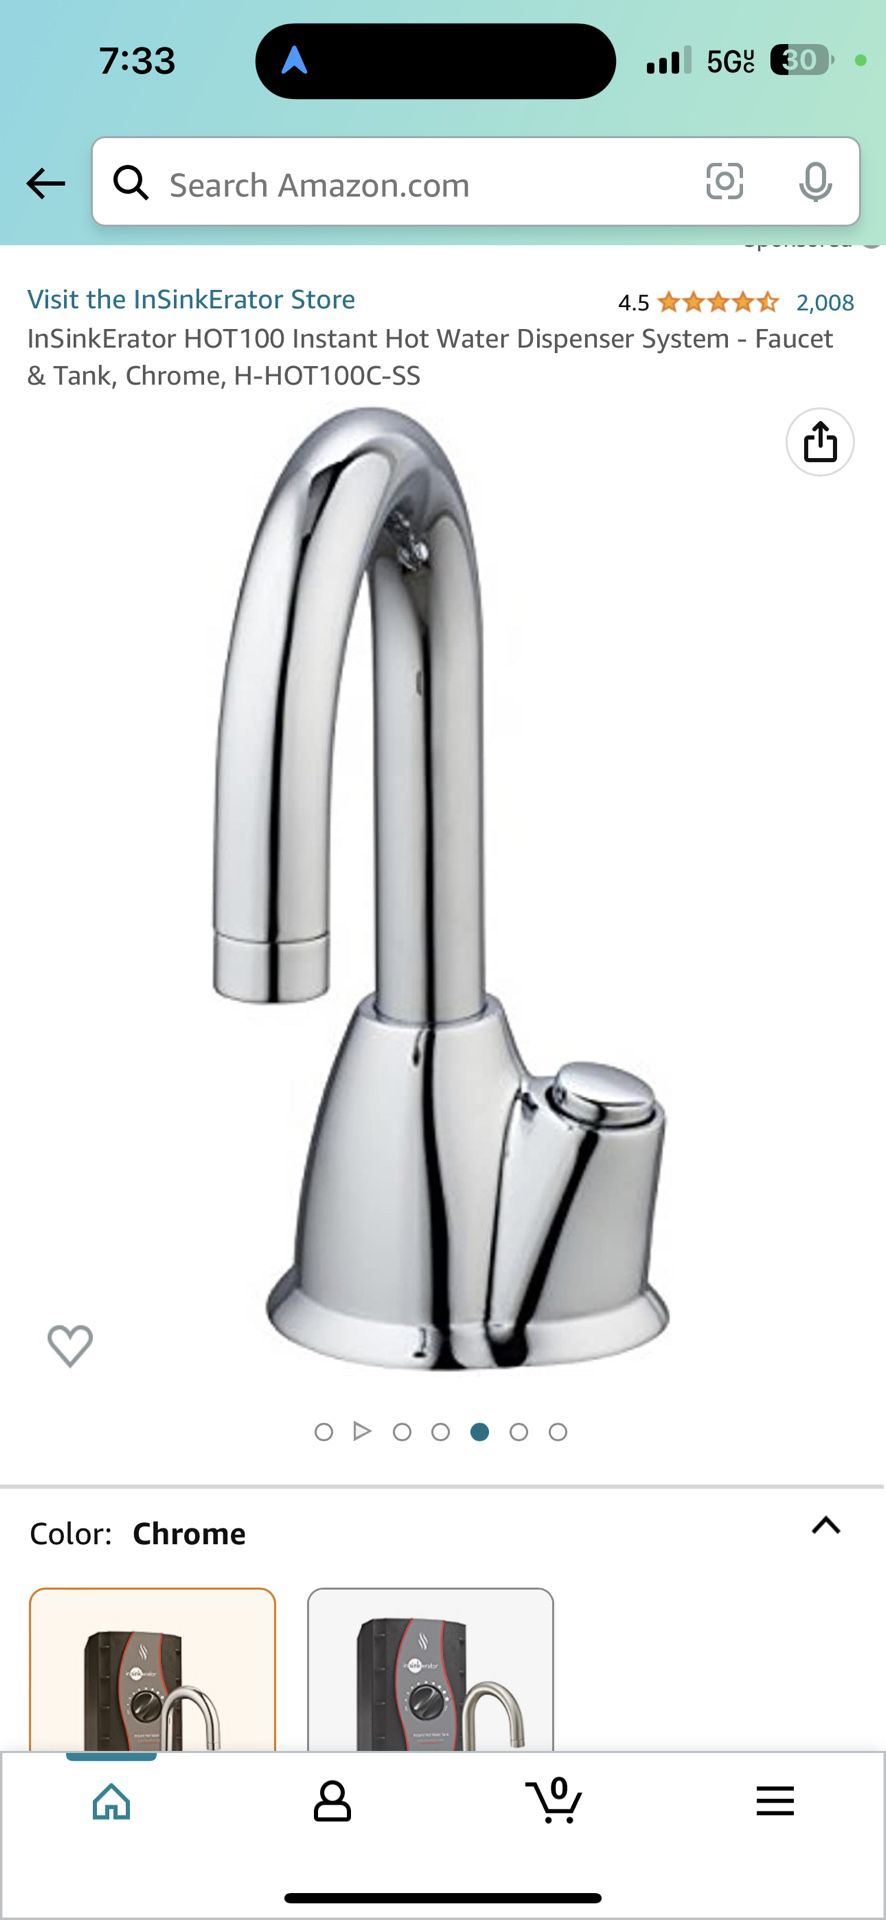 Insinkerator Hot100 Instant Hit Water Dispenser System Faucet And Tank  Chrome for Sale in Santa Ana, CA OfferUp